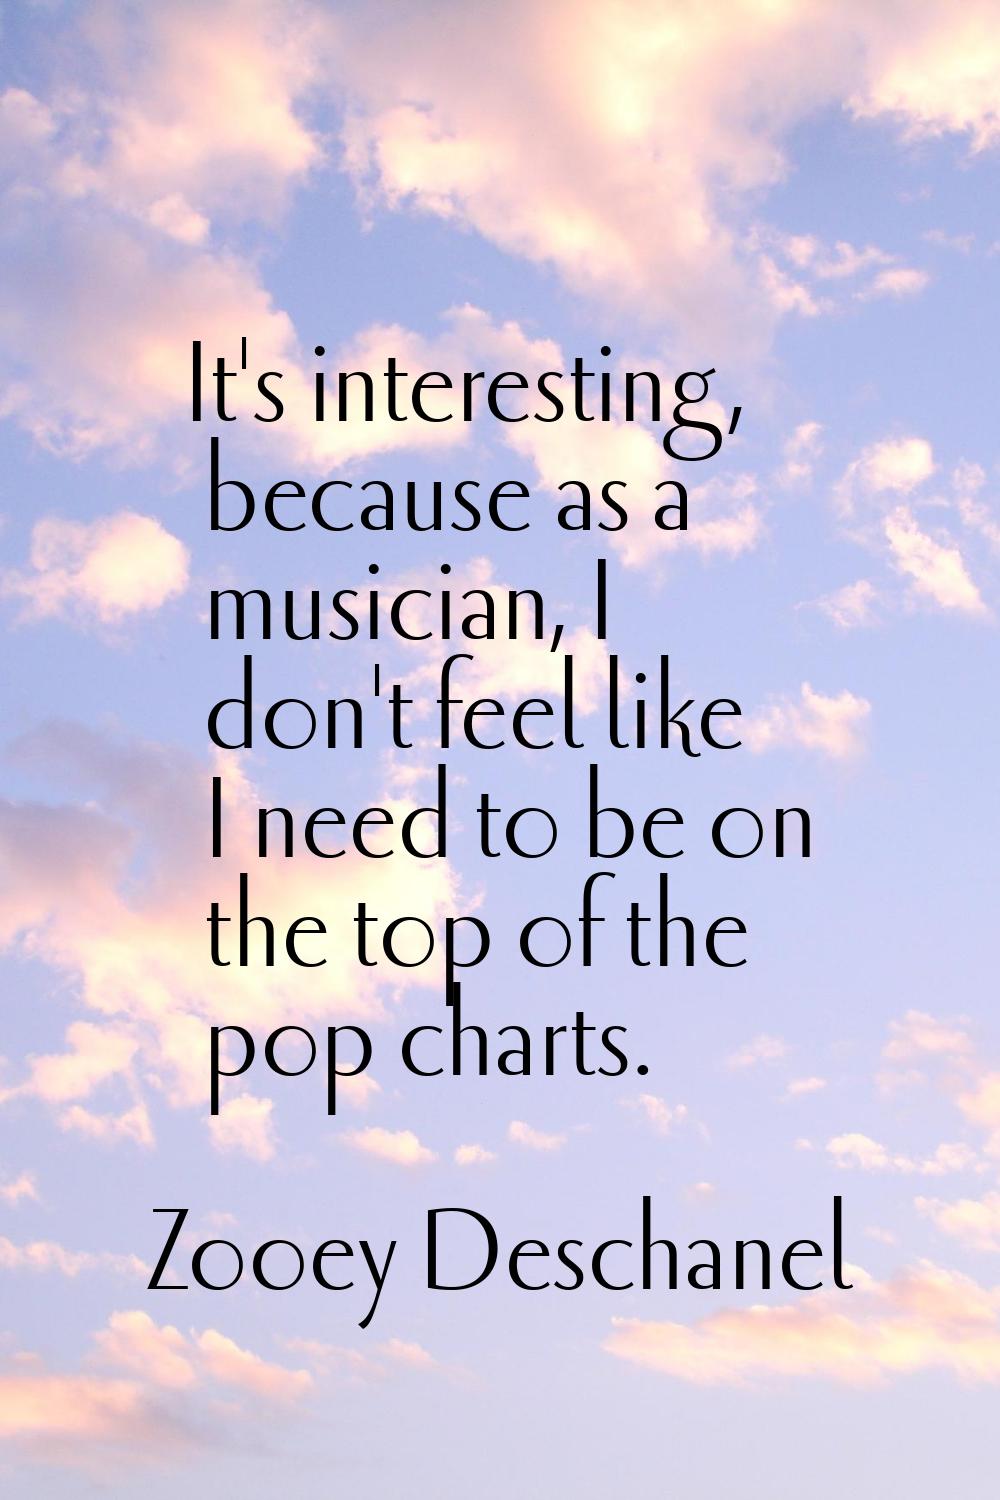 It's interesting, because as a musician, I don't feel like I need to be on the top of the pop chart